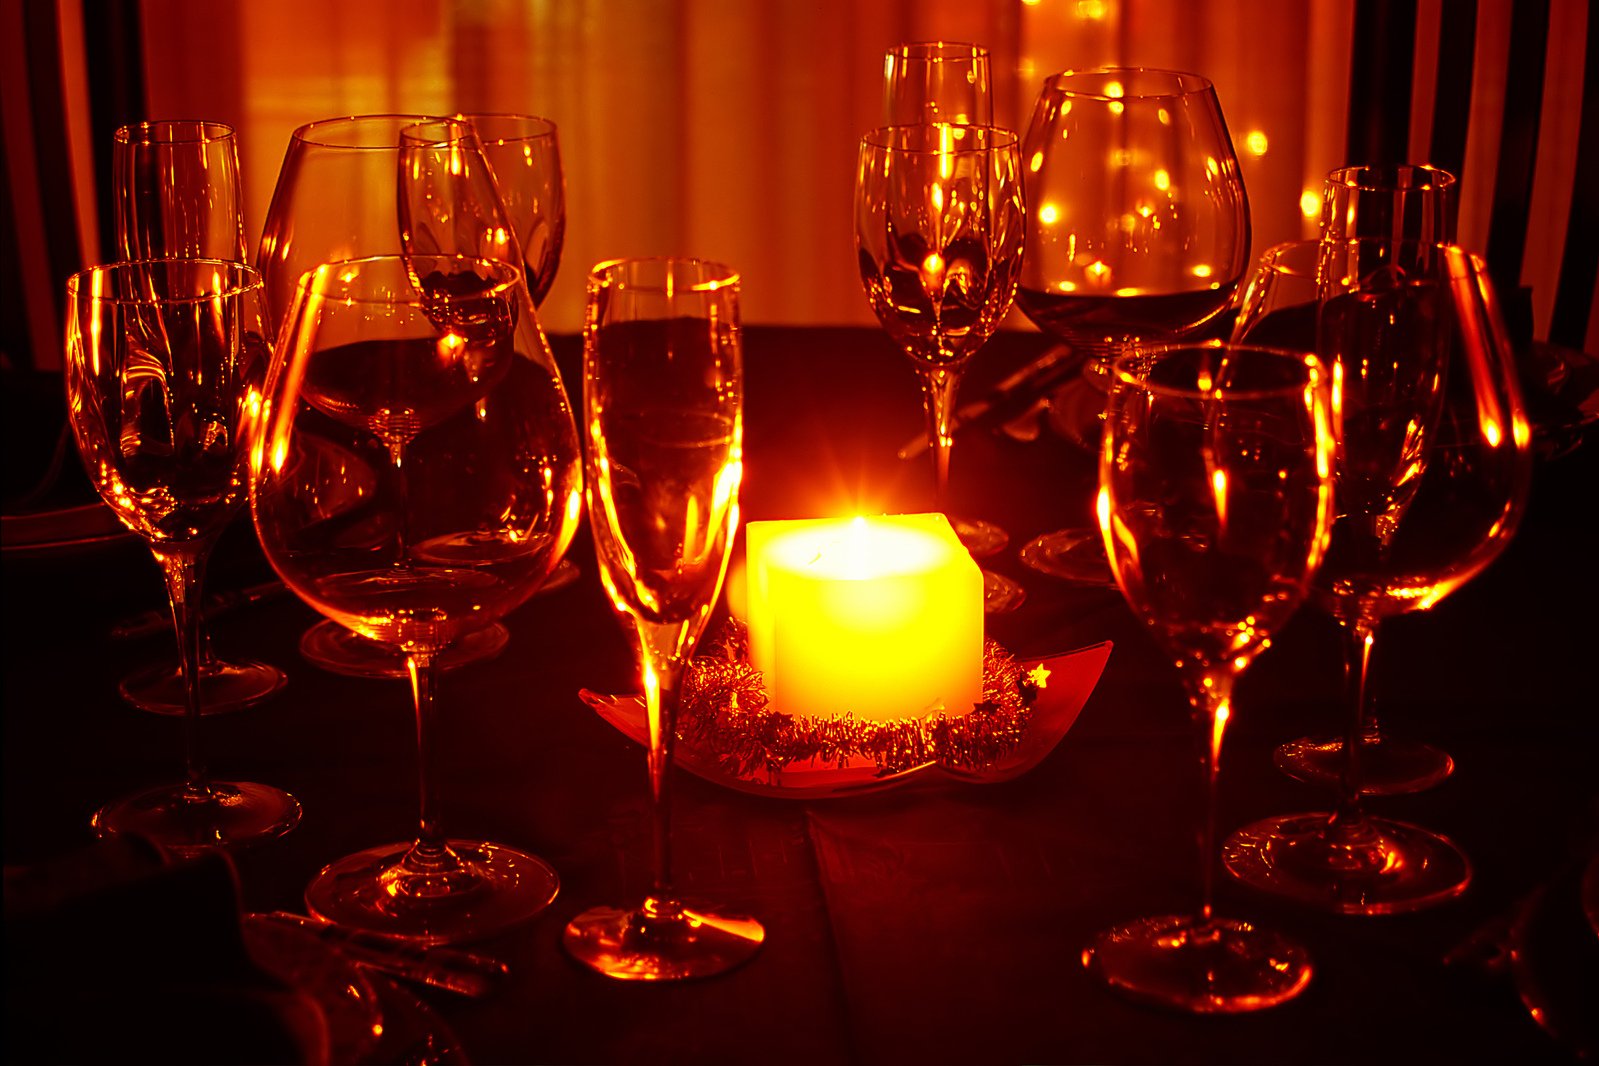 some glasses and candles sit on the table